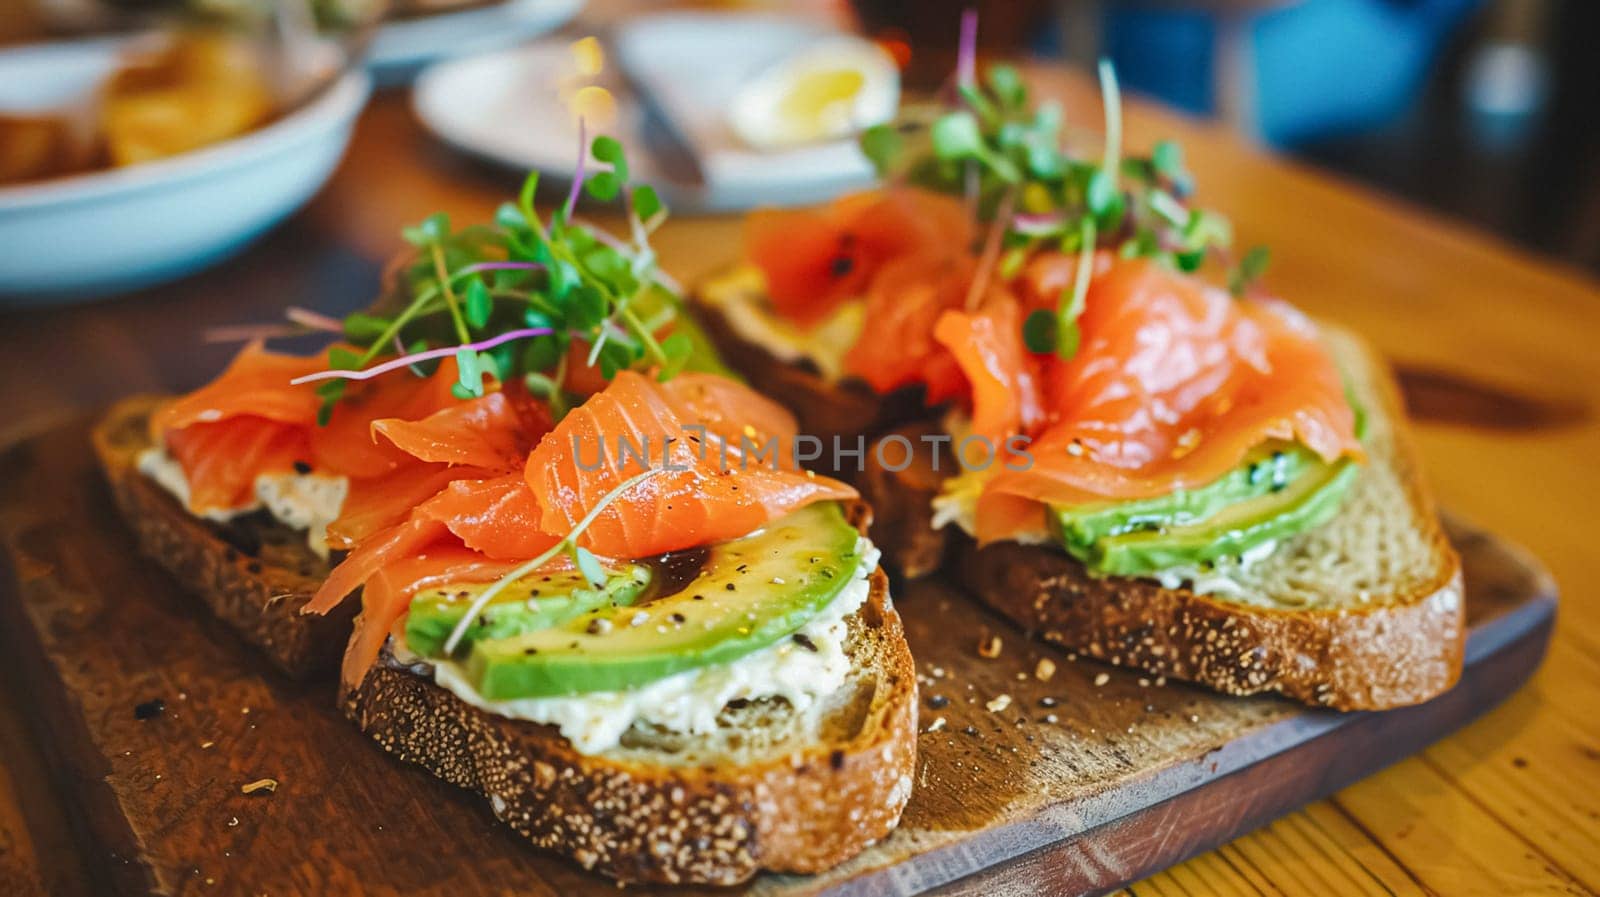 Avocado toast with smoked salmon for breakfast, homemade cuisine and traditional food, country life by Anneleven